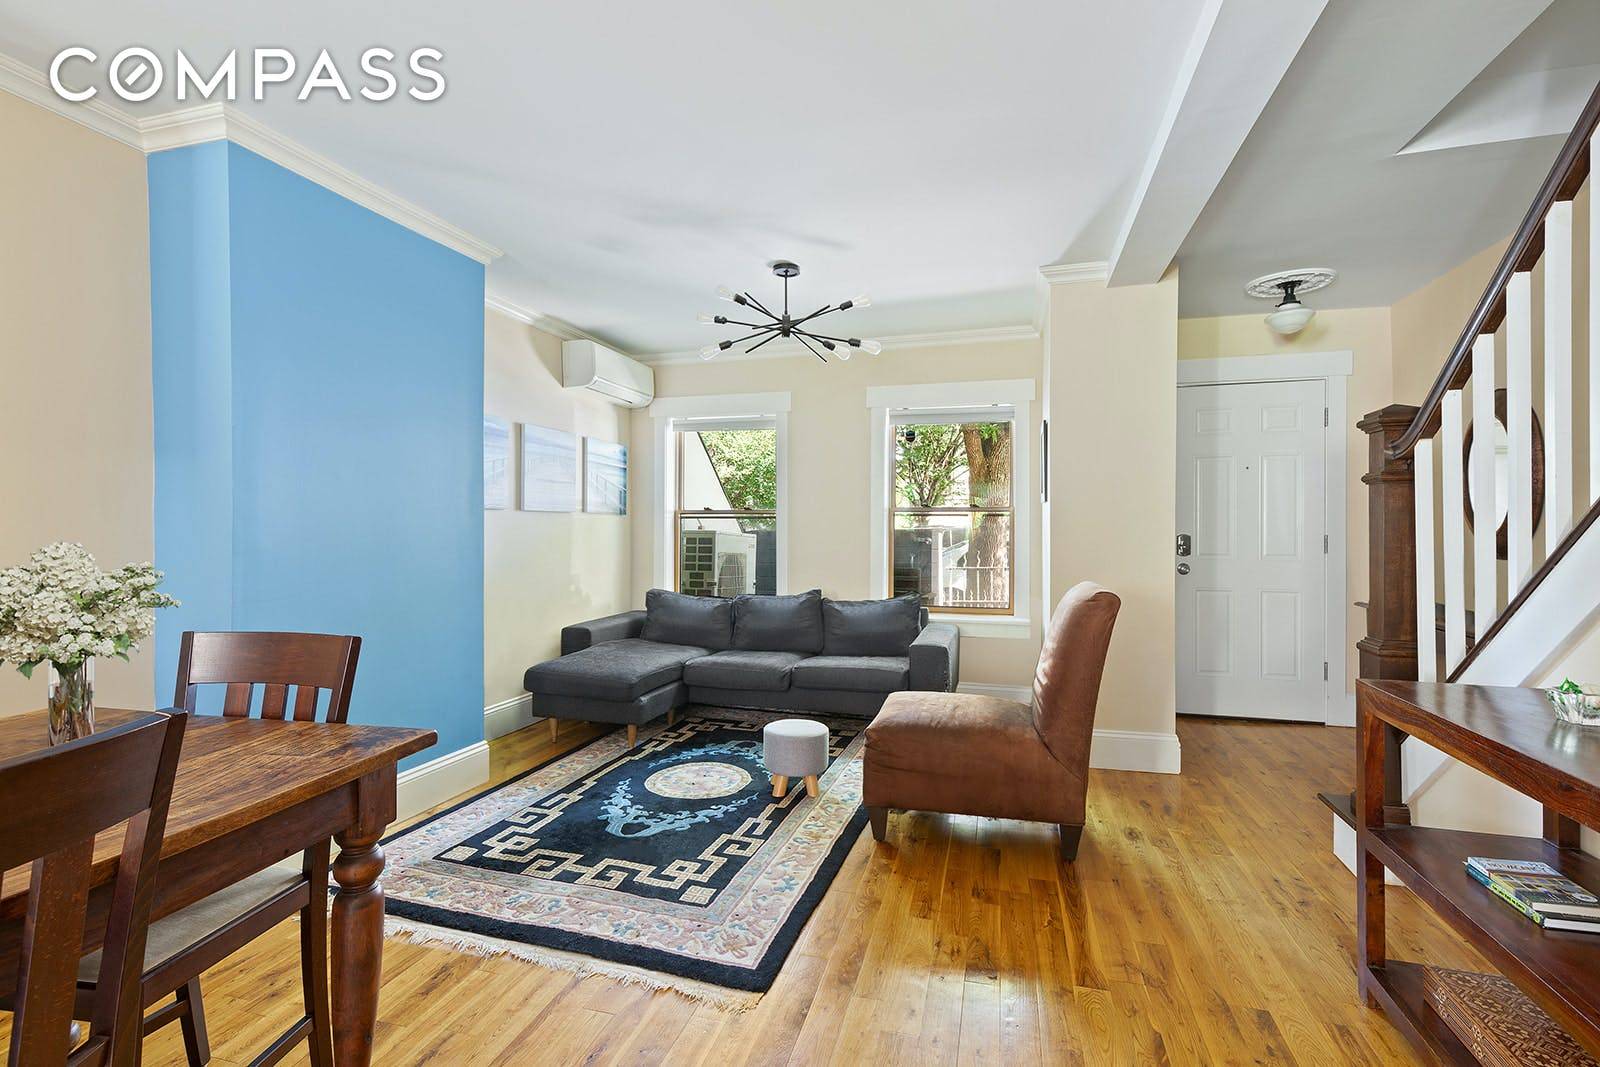 Expansive 4 bedroom, 2 1 2 bathroom single family home located midblock on 16th Street near 7th Ave.